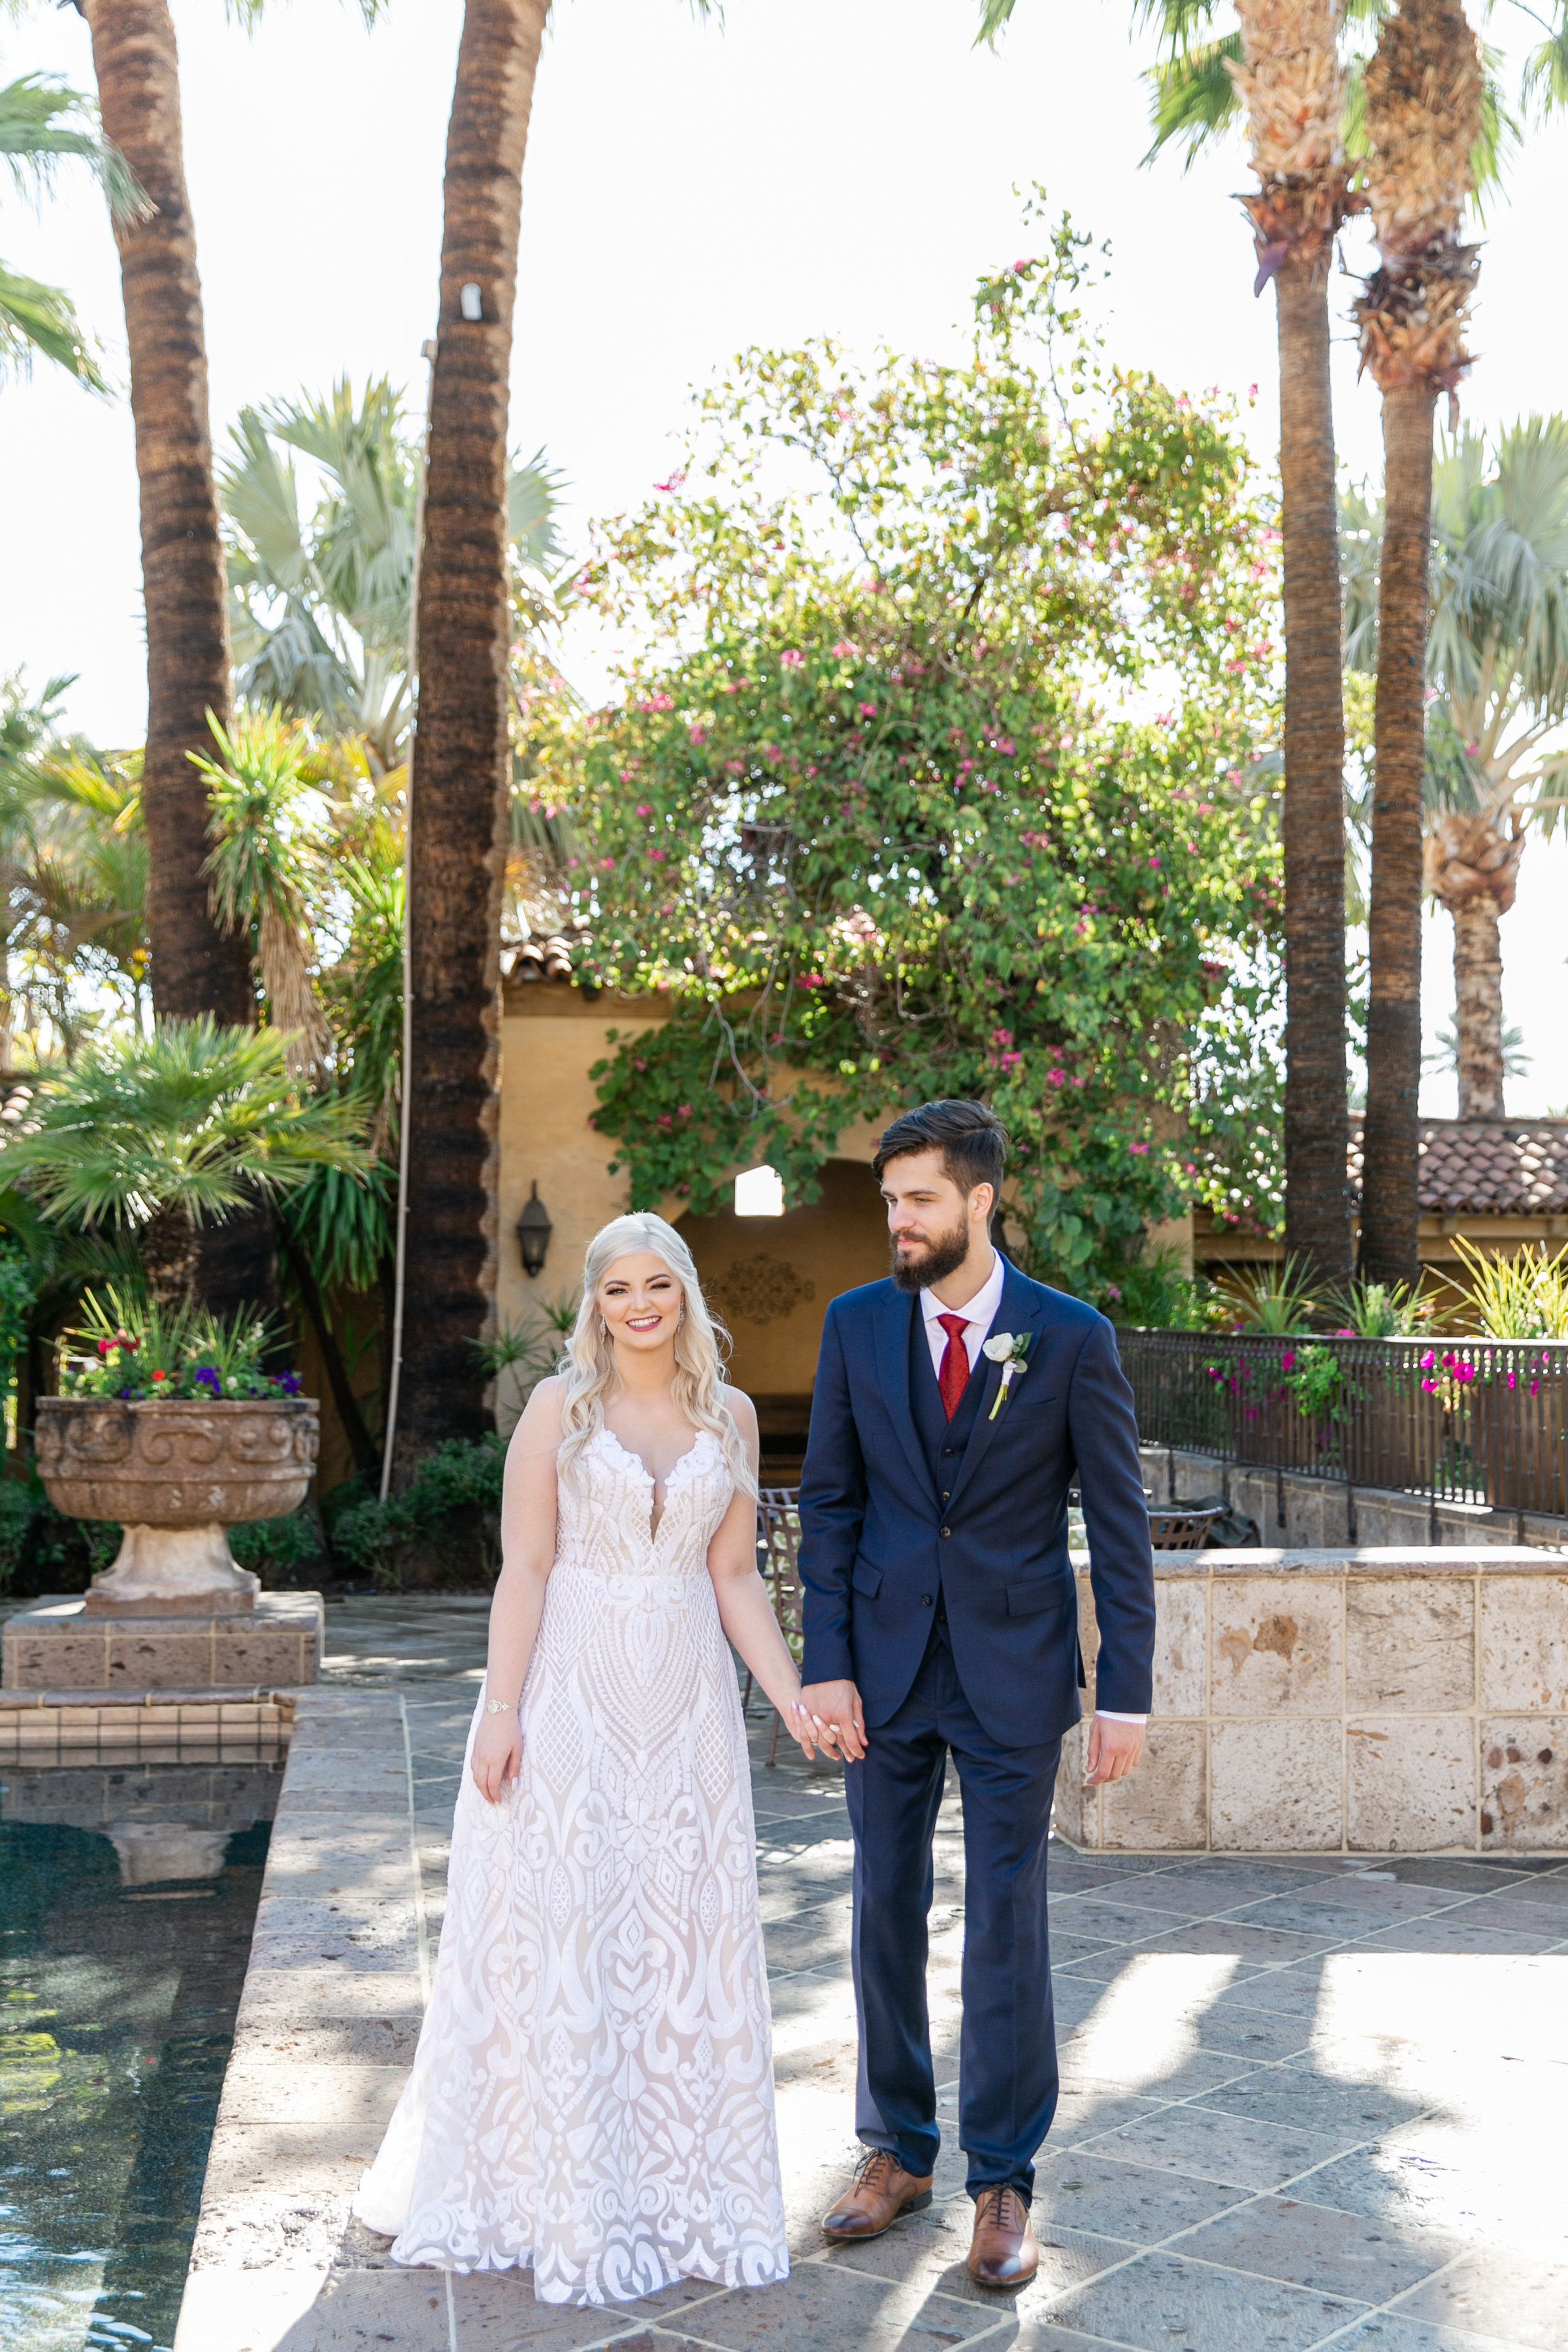 Karlie Colleen Photography - The Royal Palms Wedding - Some Like It Classic - Alex & Sam-134